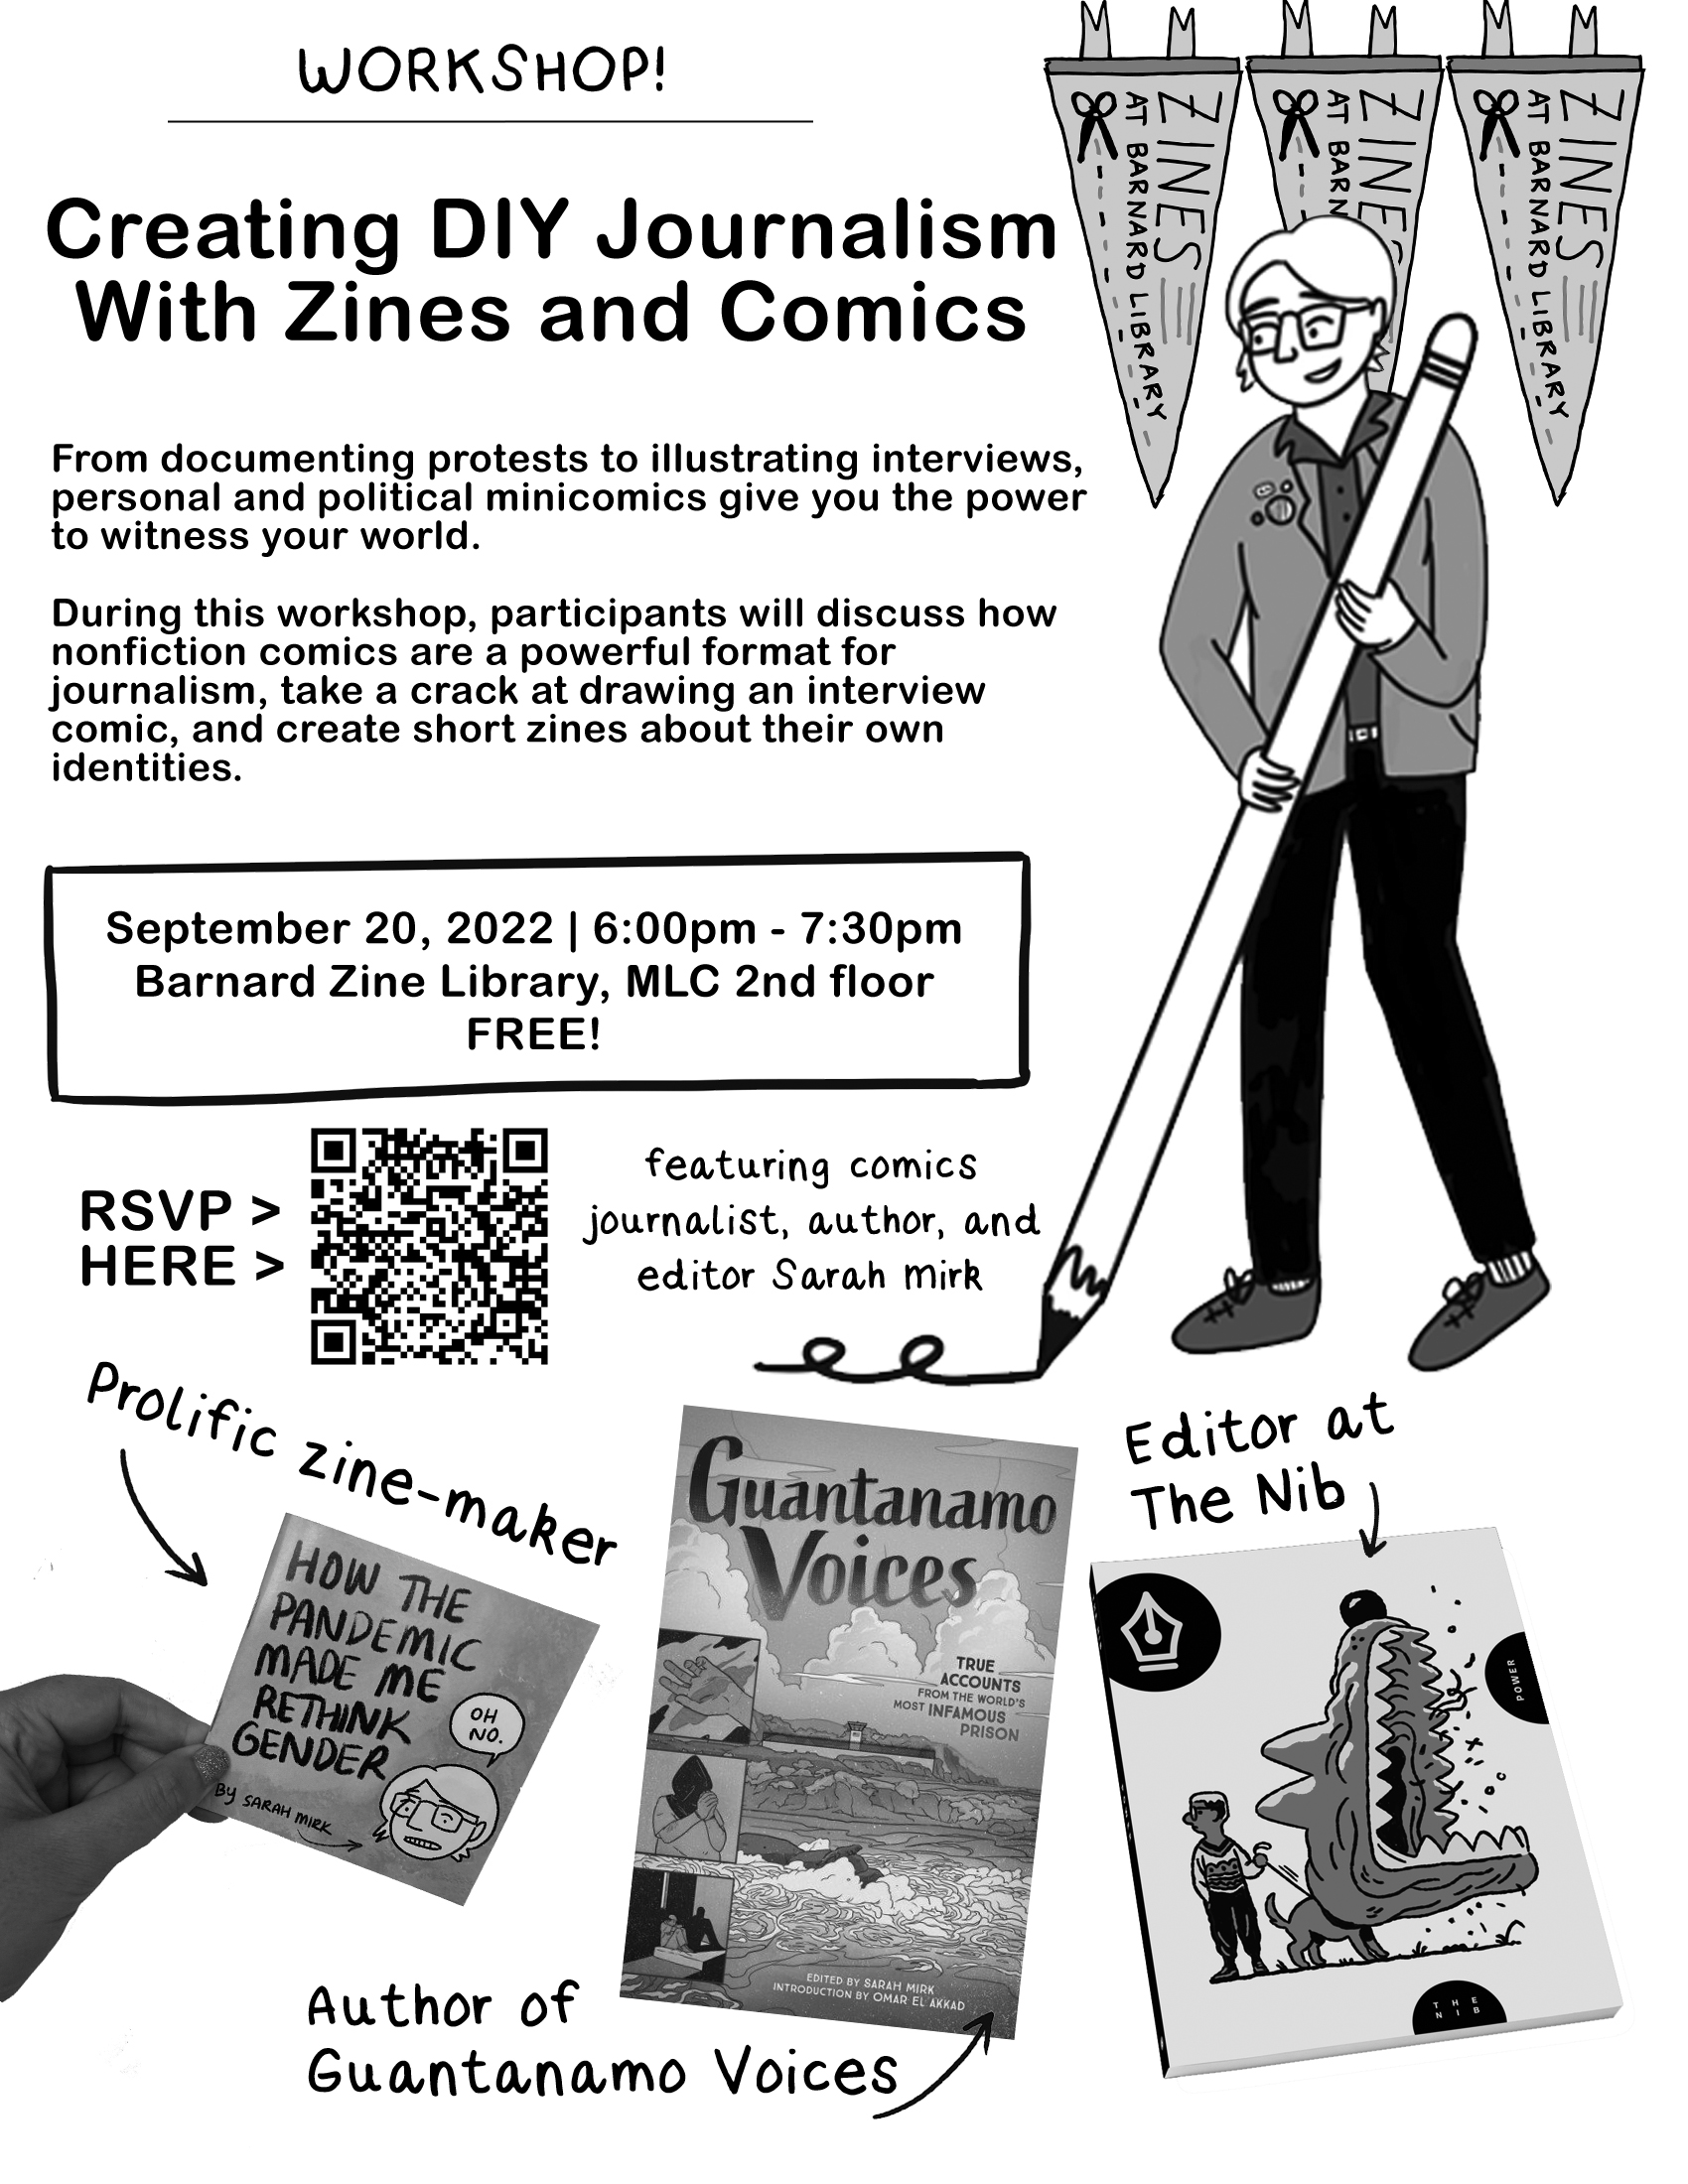 drawing of person holding a giant pencil, workshop text and details (as included on this web page)